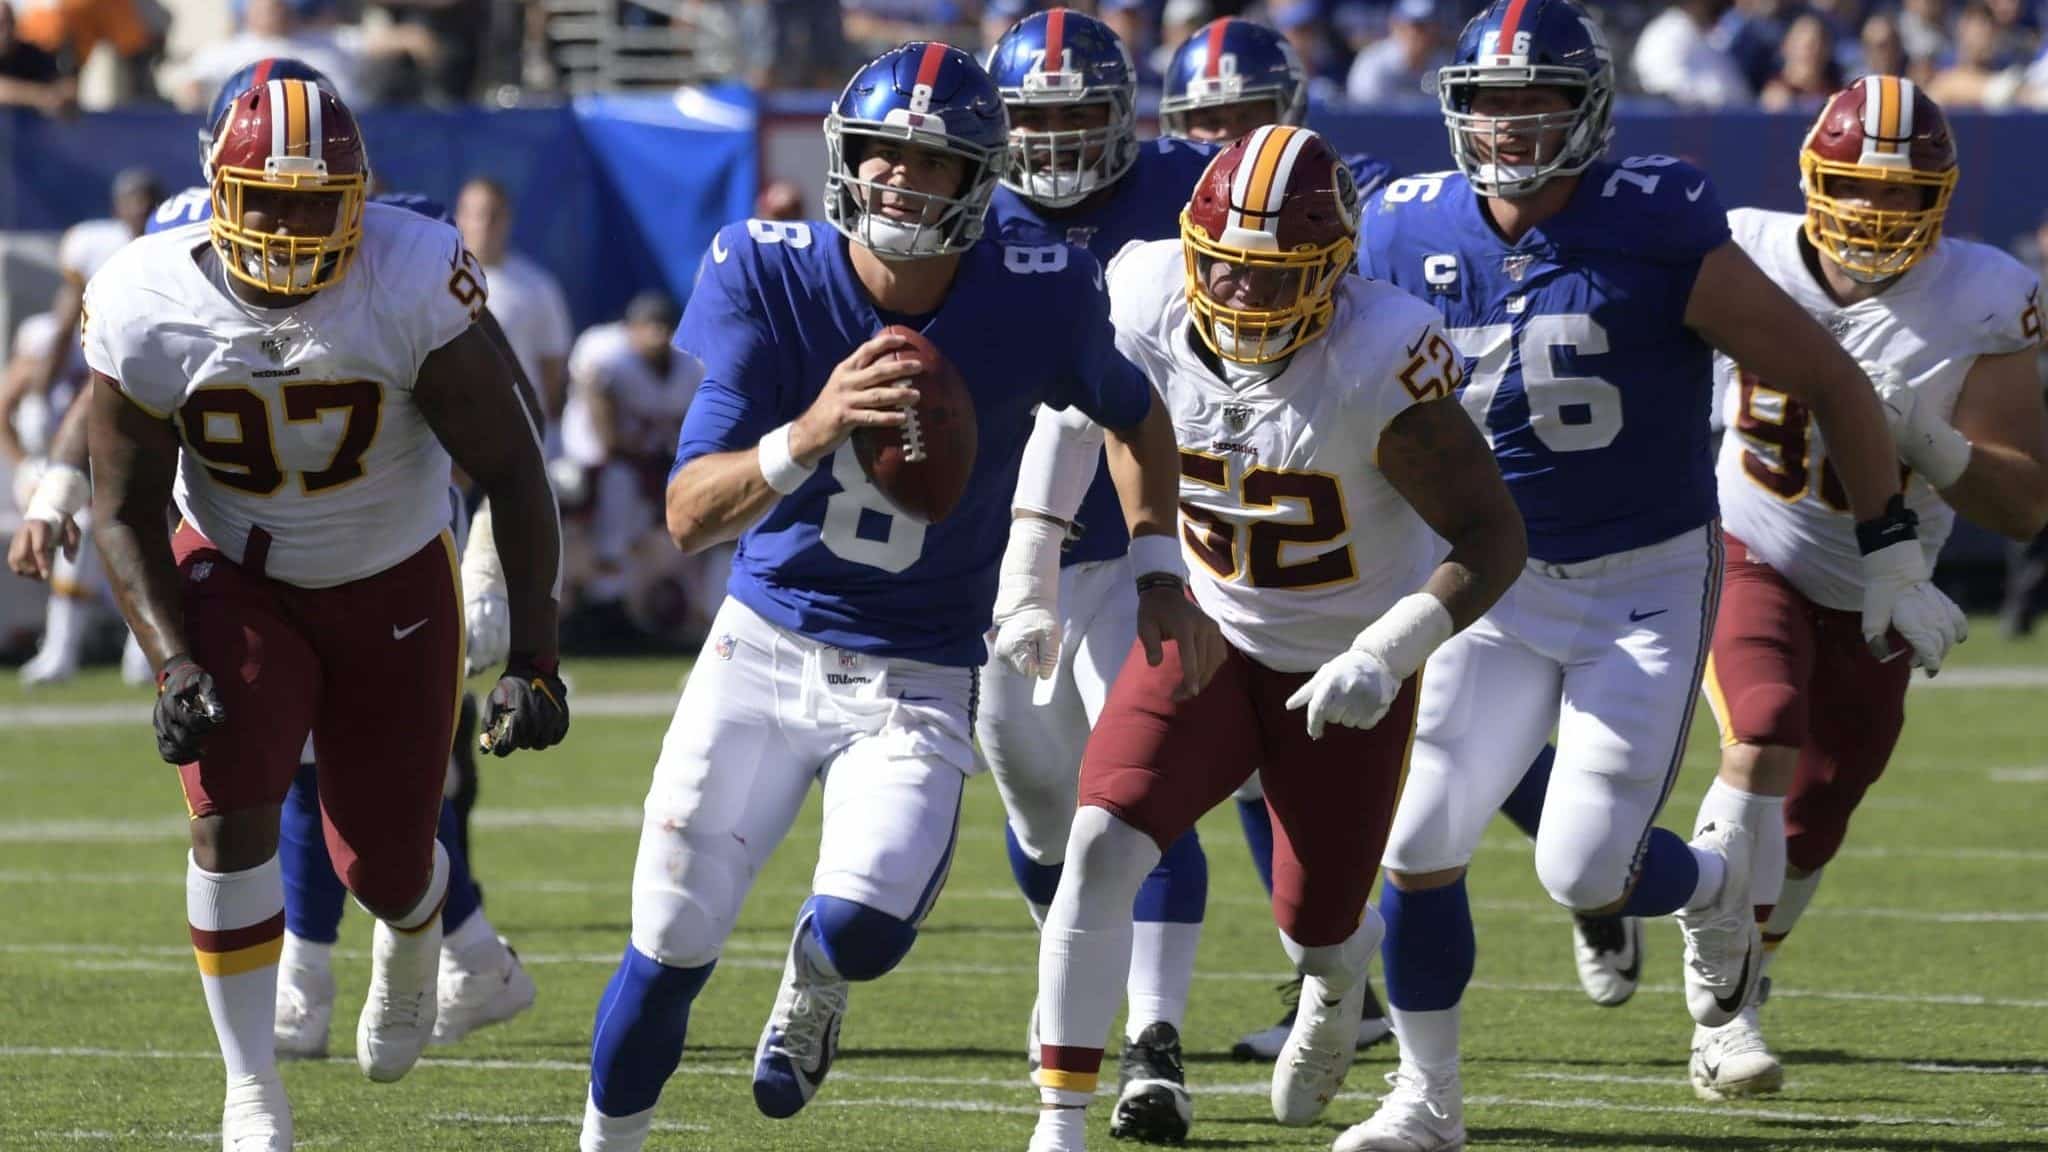 New York Giants quarterback Daniel Jones, second from left, runs the ball during the first half of an NFL football game against the Washington Redskins, Sunday, Sept. 29, 2019, in East Rutherford, N.J.